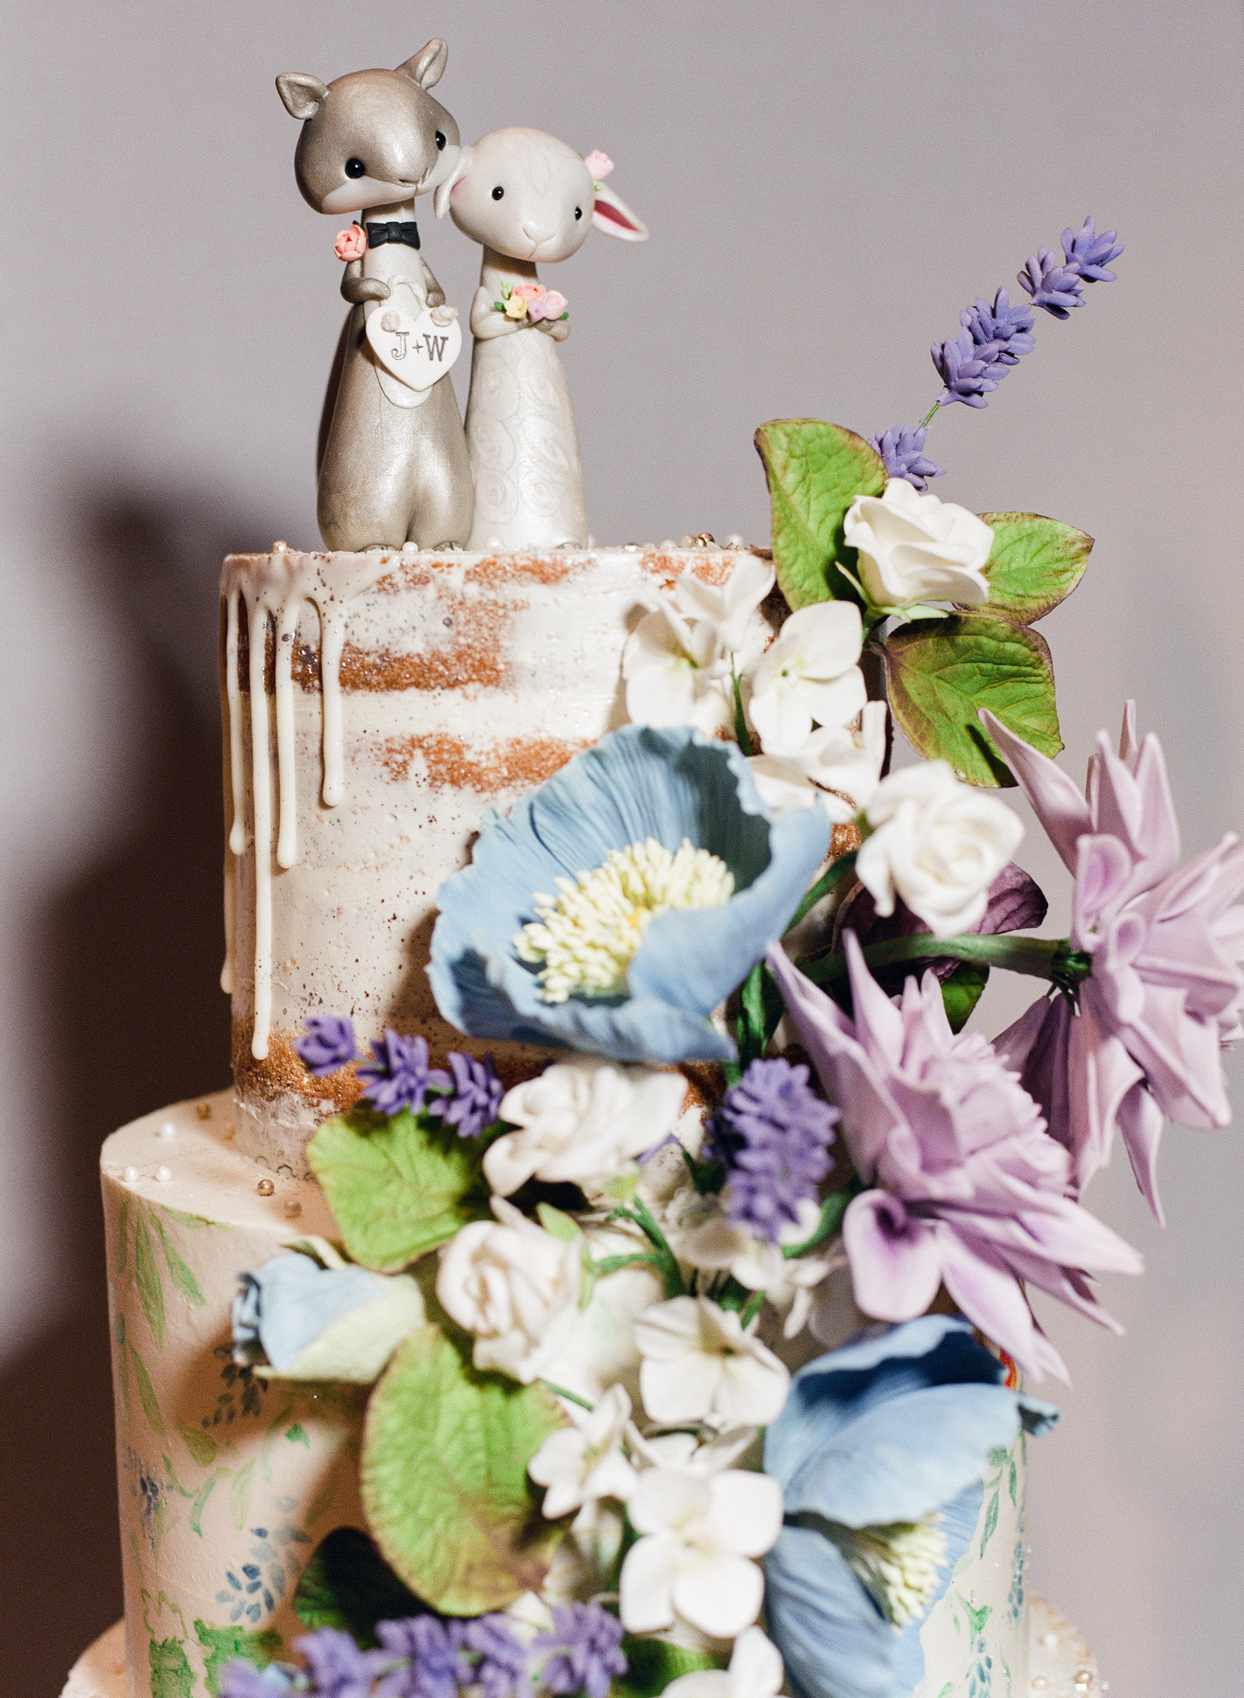 wedding cake topped with squirrel and lamb figurines